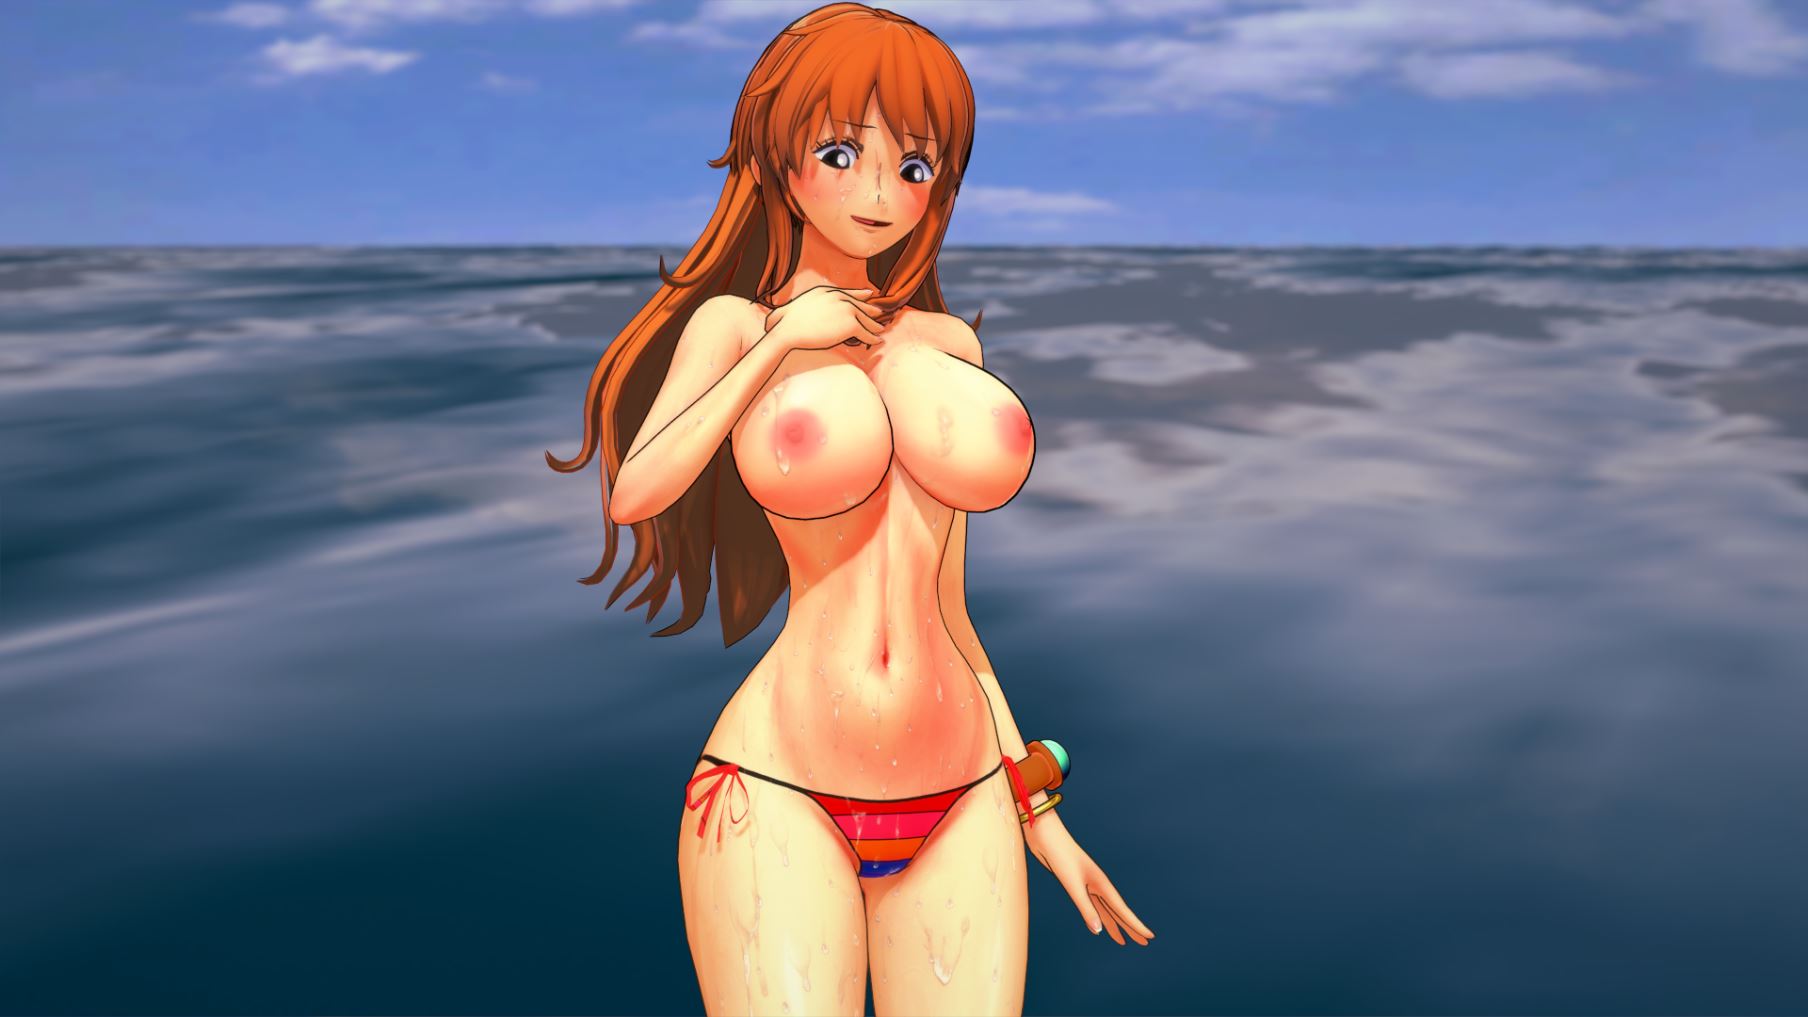 One Piece Porn Games - One Piece: Lost at Sea Ren'Py Porn Sex Game v.0.1a Download for Windows,  MacOS, Linux